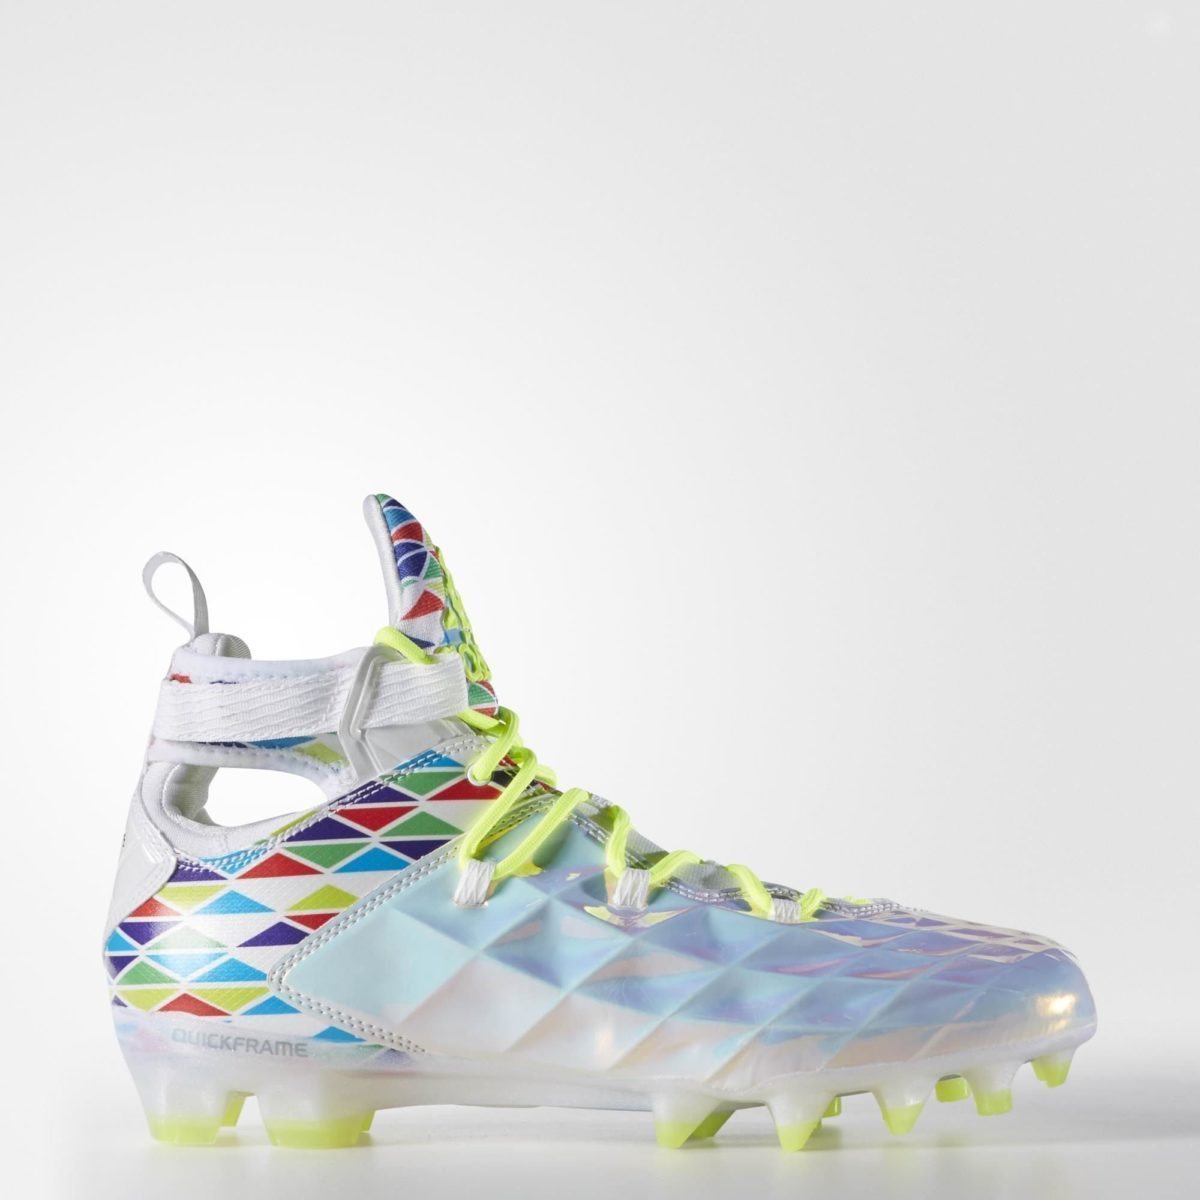 Win Adidas Crazyquick Lacrosse Cleats 